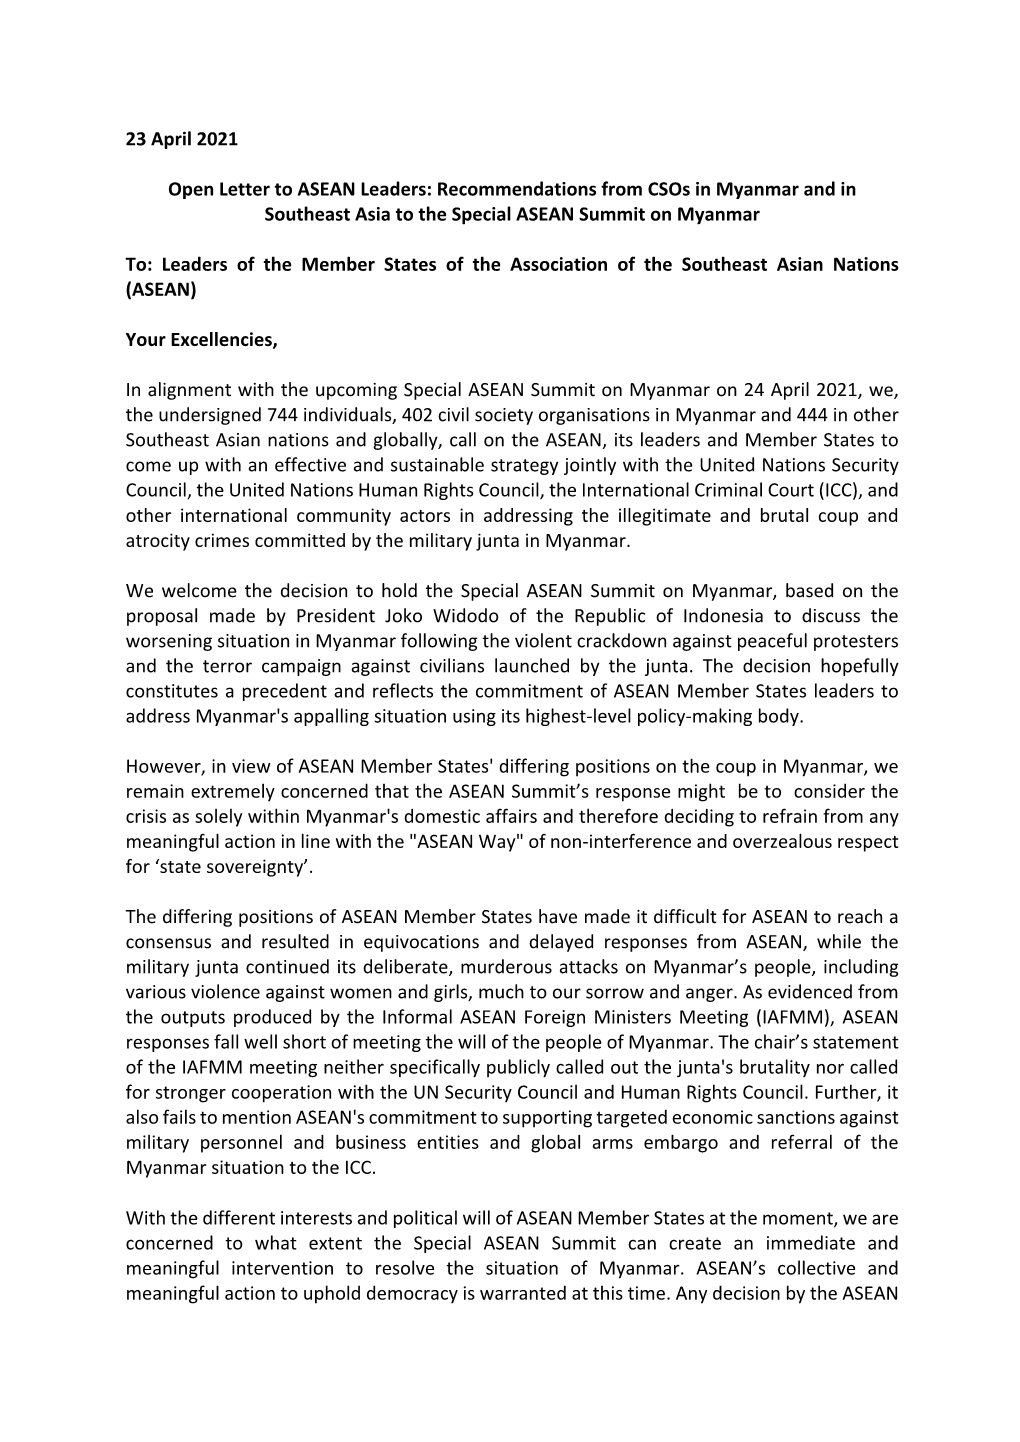 23 April 2021 Open Letter to ASEAN Leaders